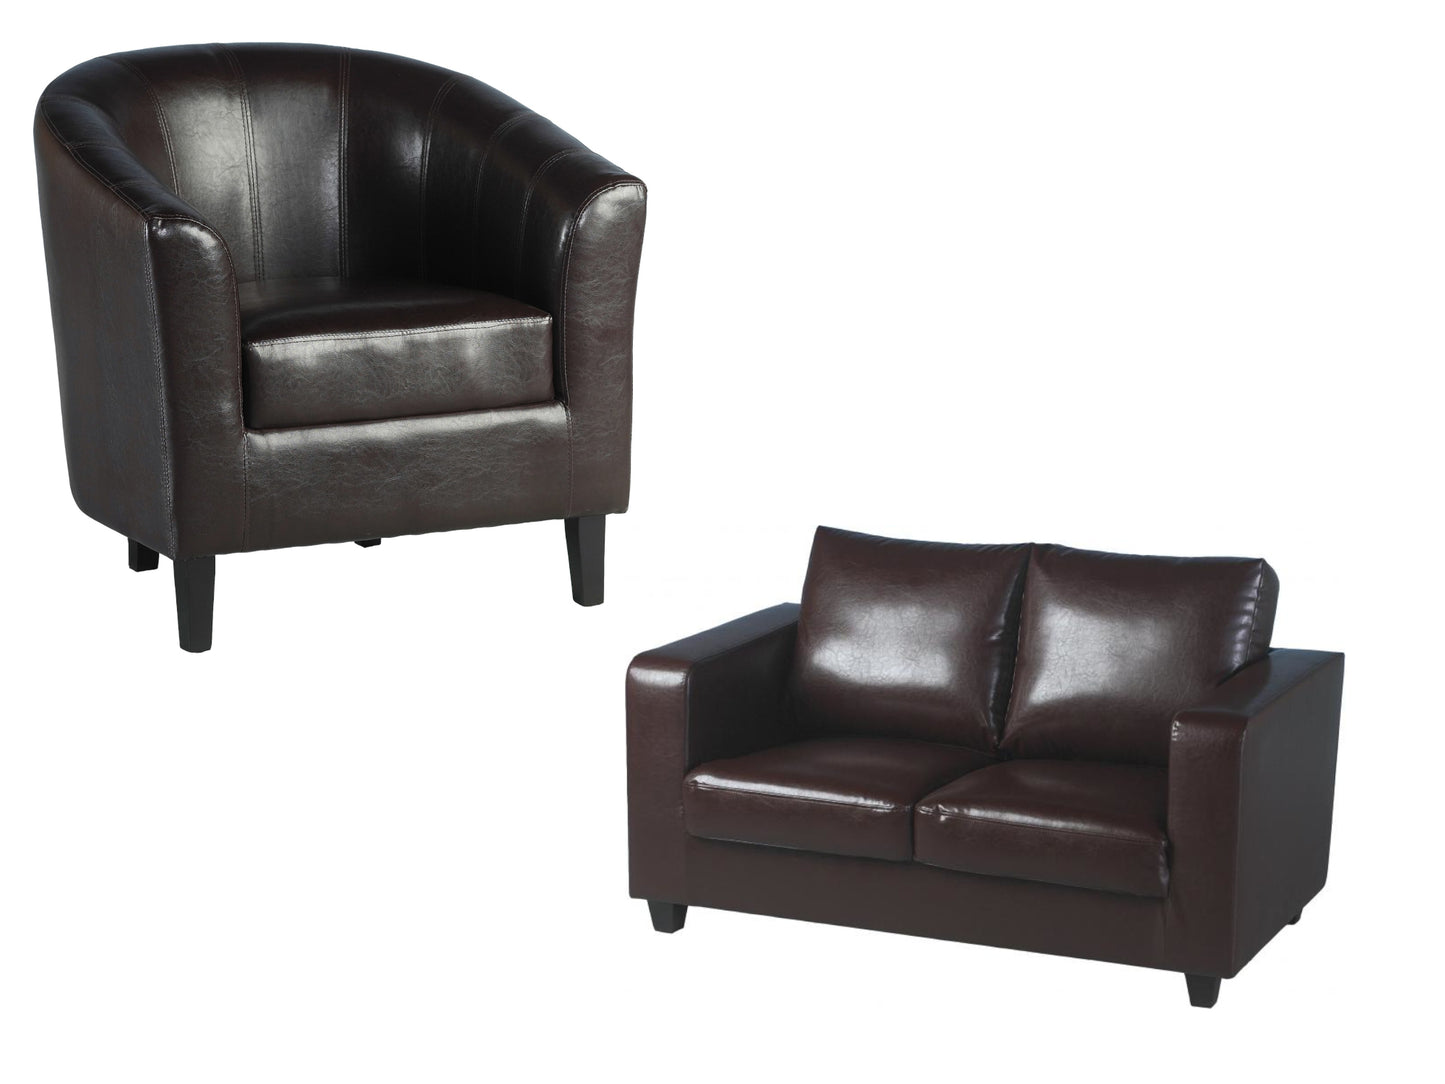 Tempo Sofa and Tub Chair in Brown Faux Leather